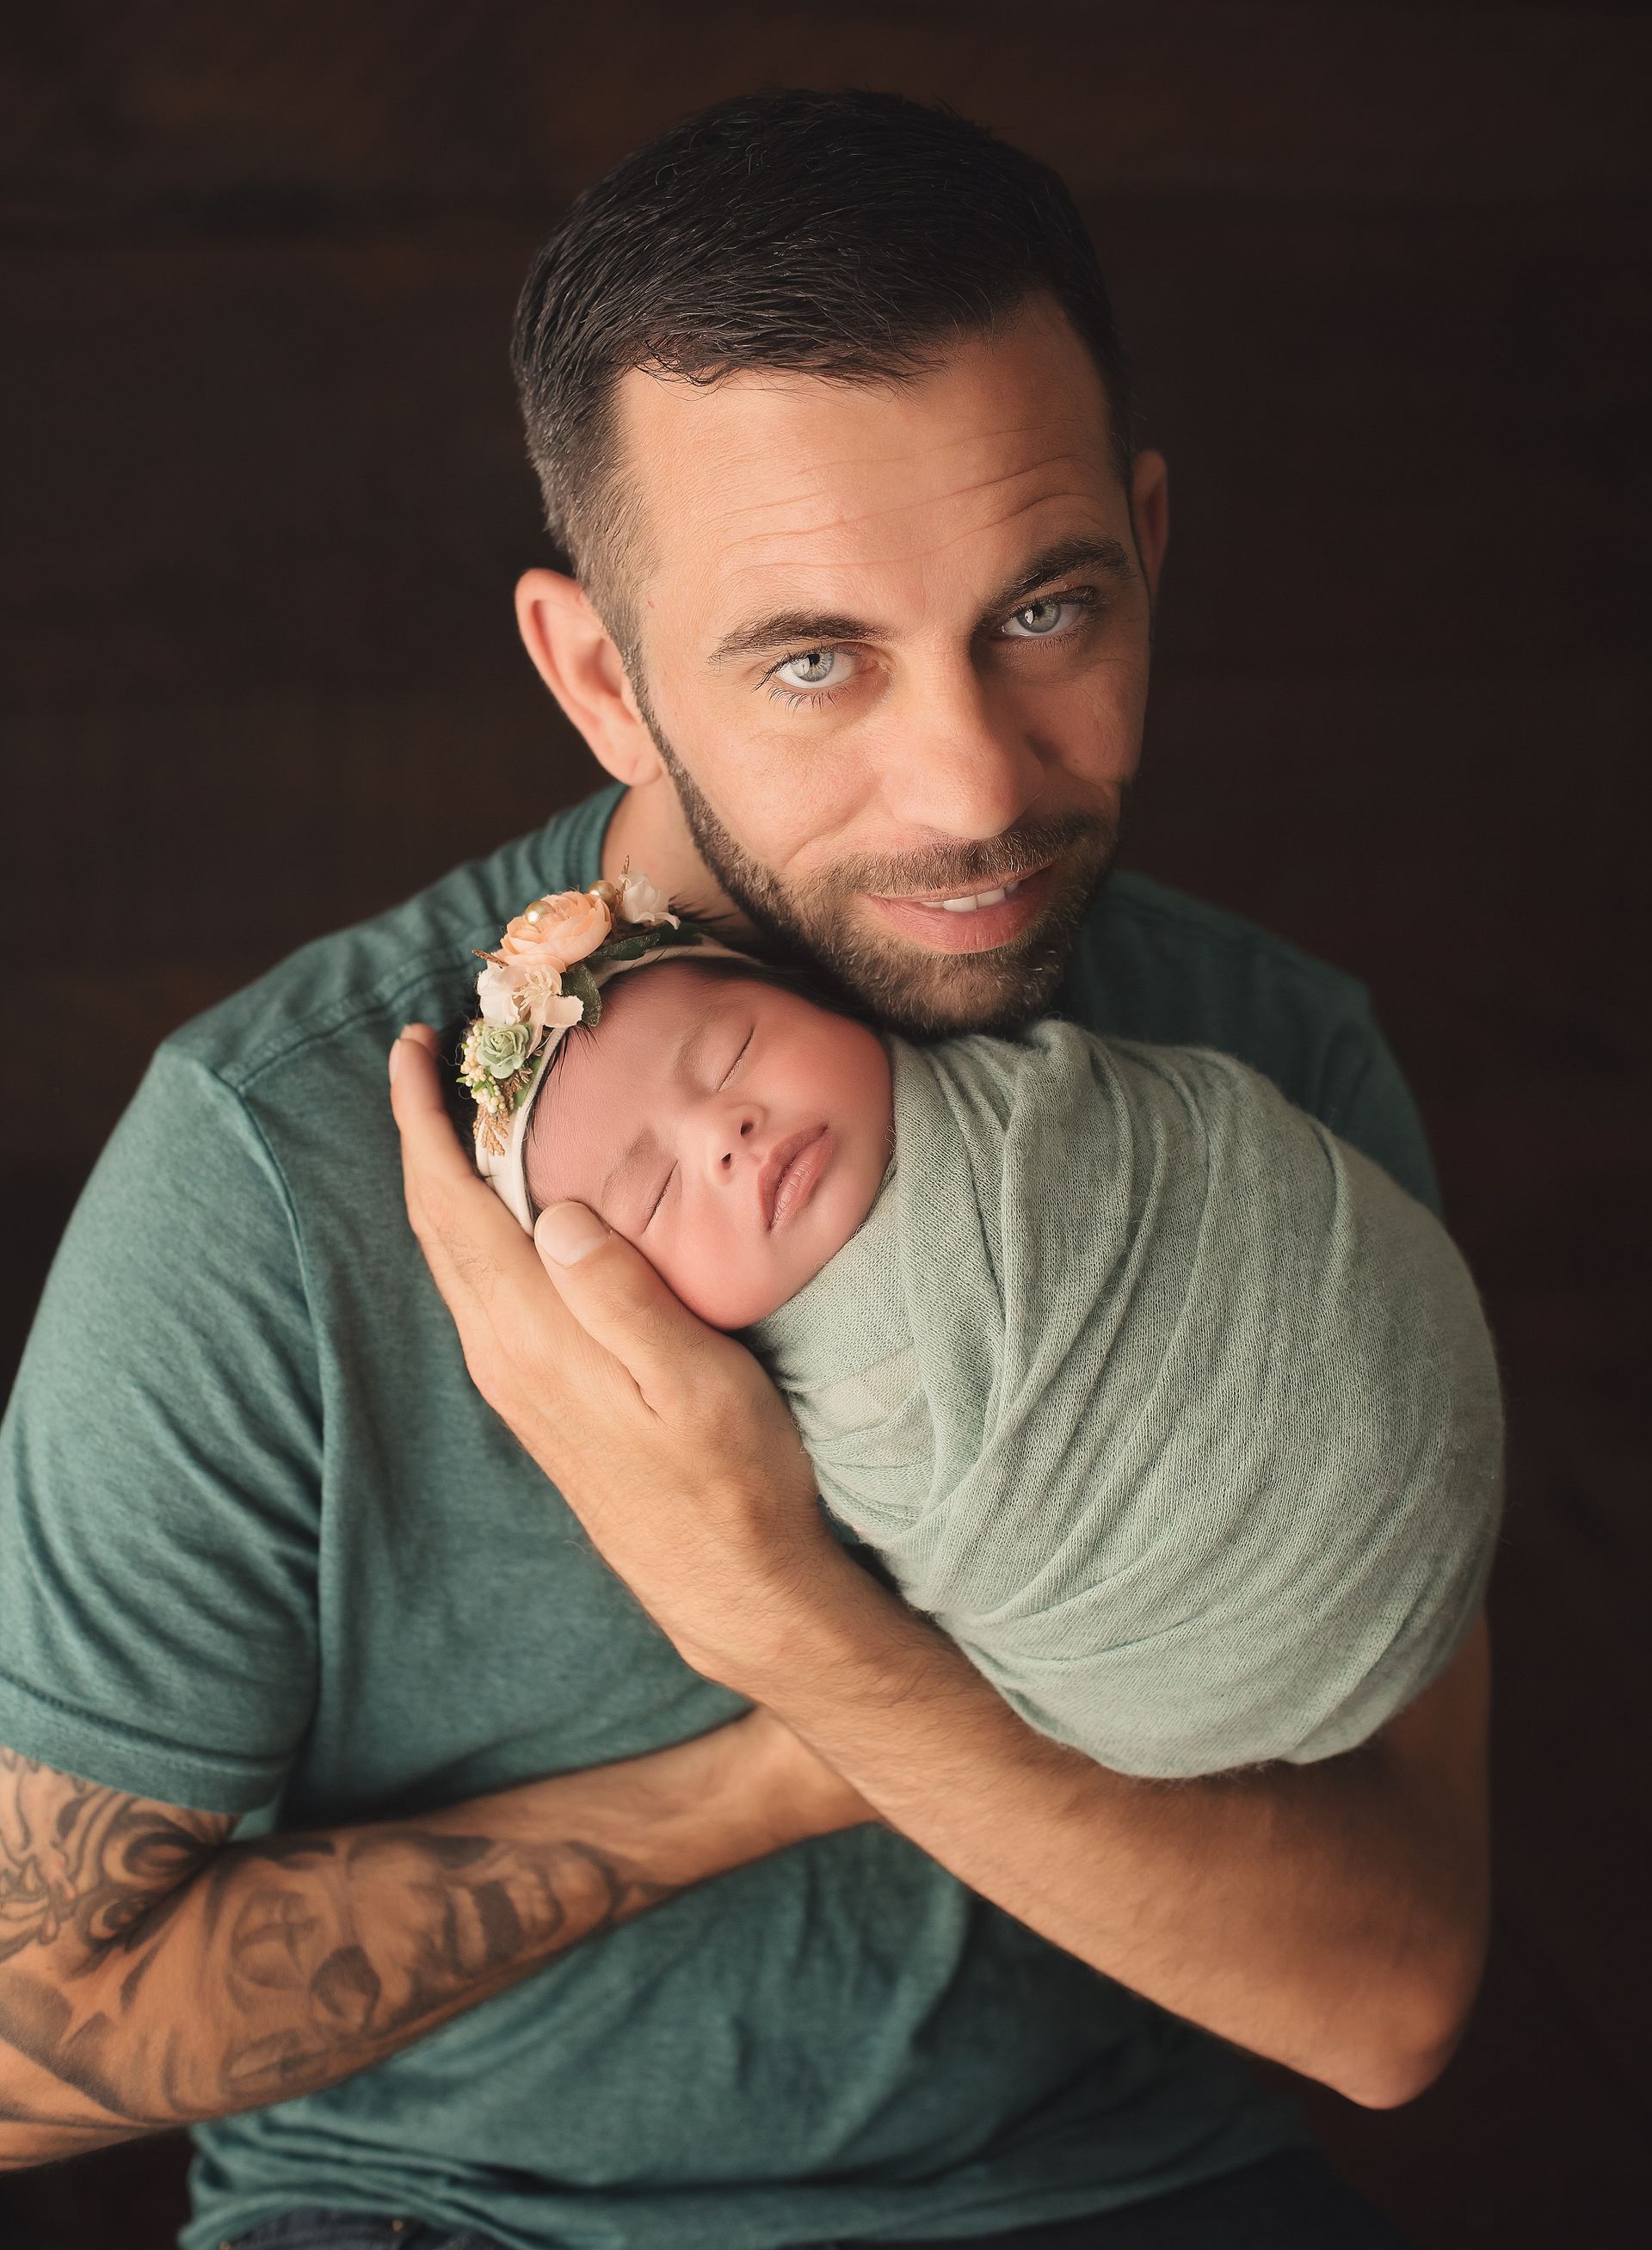 A man is holding a newborn baby wrapped in a green blanket.